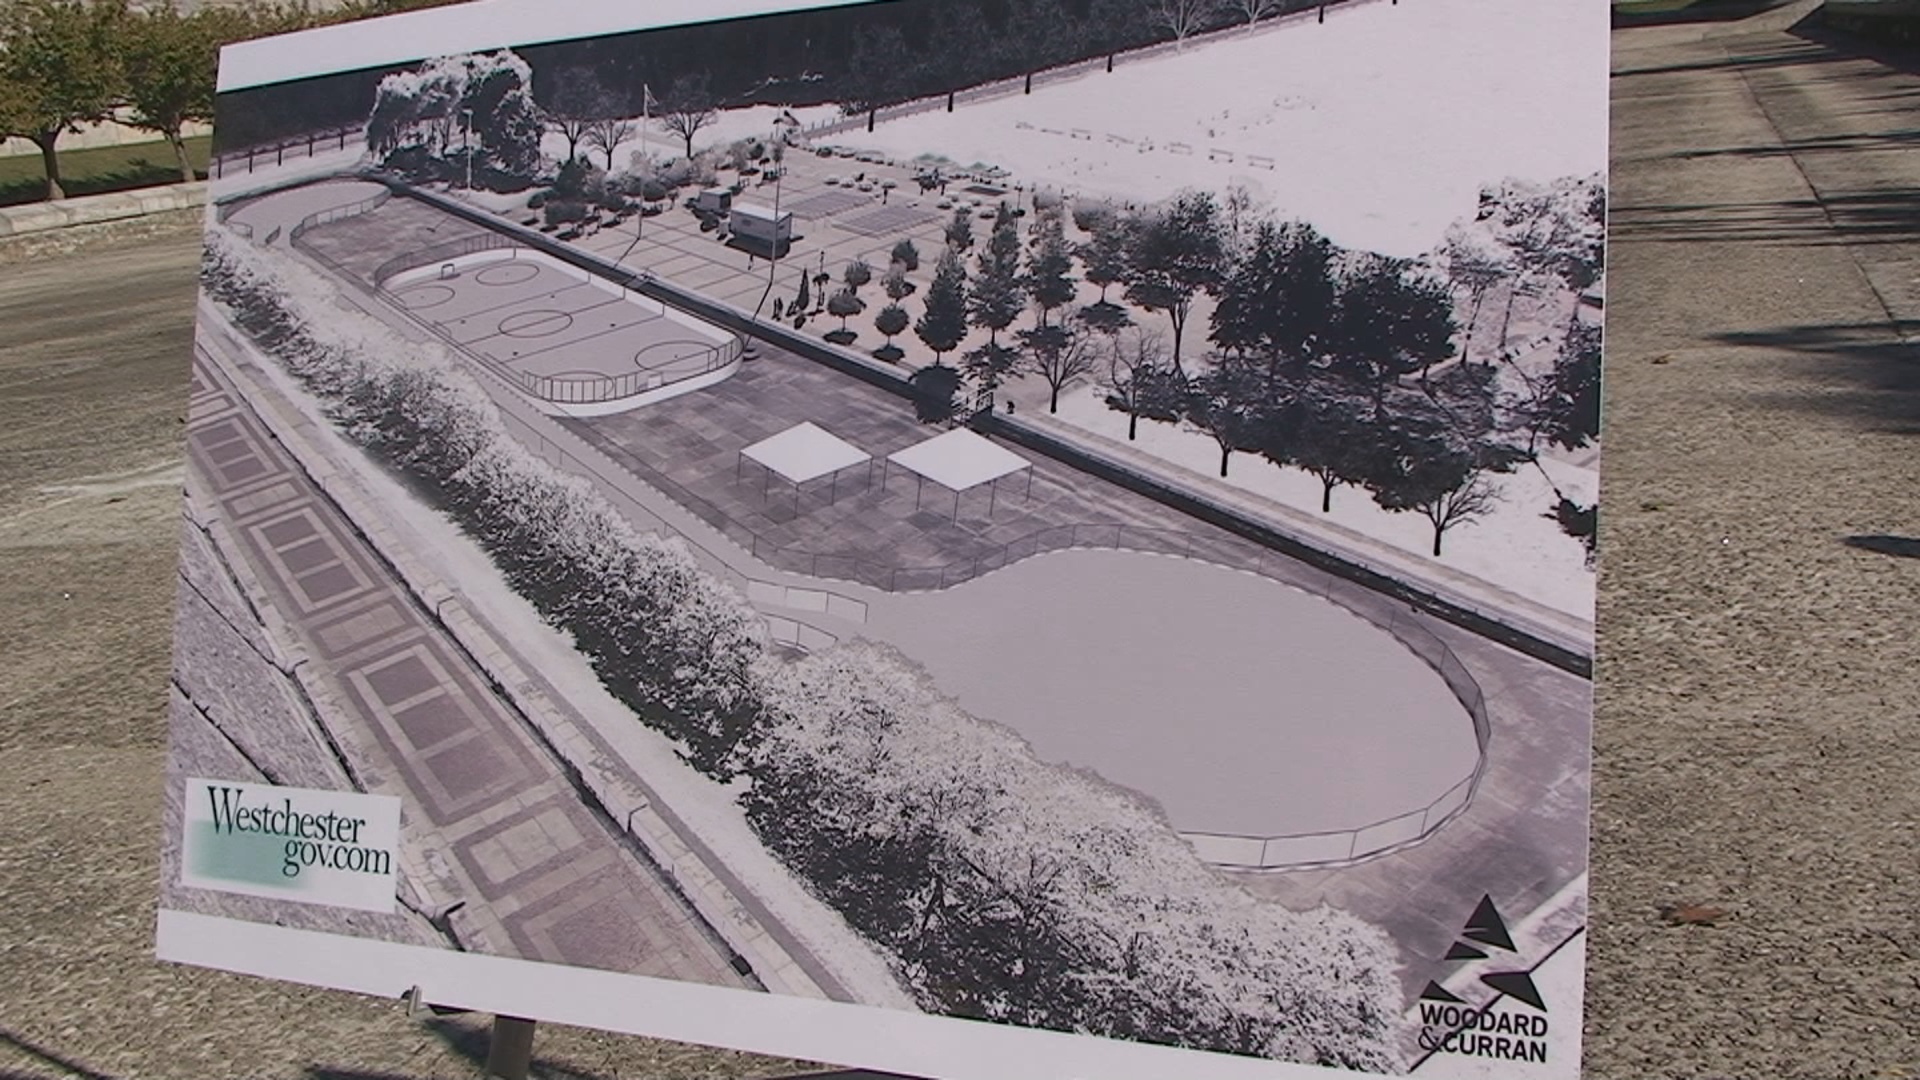 Spectacular 25 Million Ice Rink Park Planned for Kensico Dam Plaza